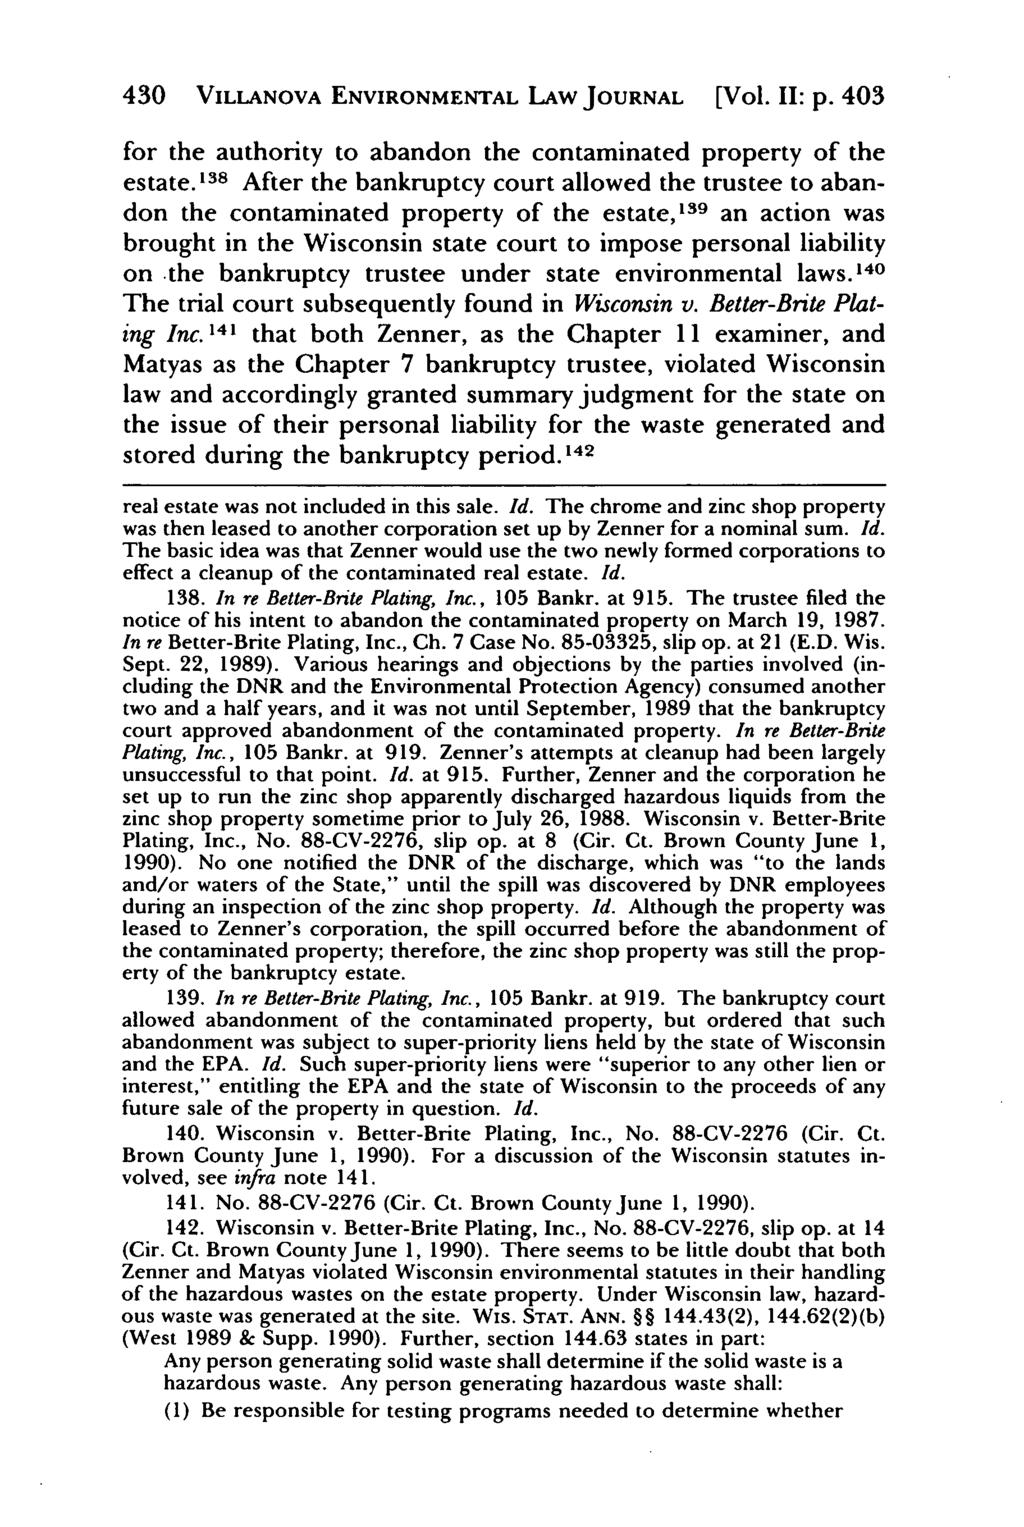 Villanova Environmental Law Journal, Vol. 2, Iss. 2 [1991], Art. 5 430 VILLANOVA ENVIRONMENTAL LAW JOURNAL [Vol. II: p. 403 for the authority to abandon the contaminated property of the estate.